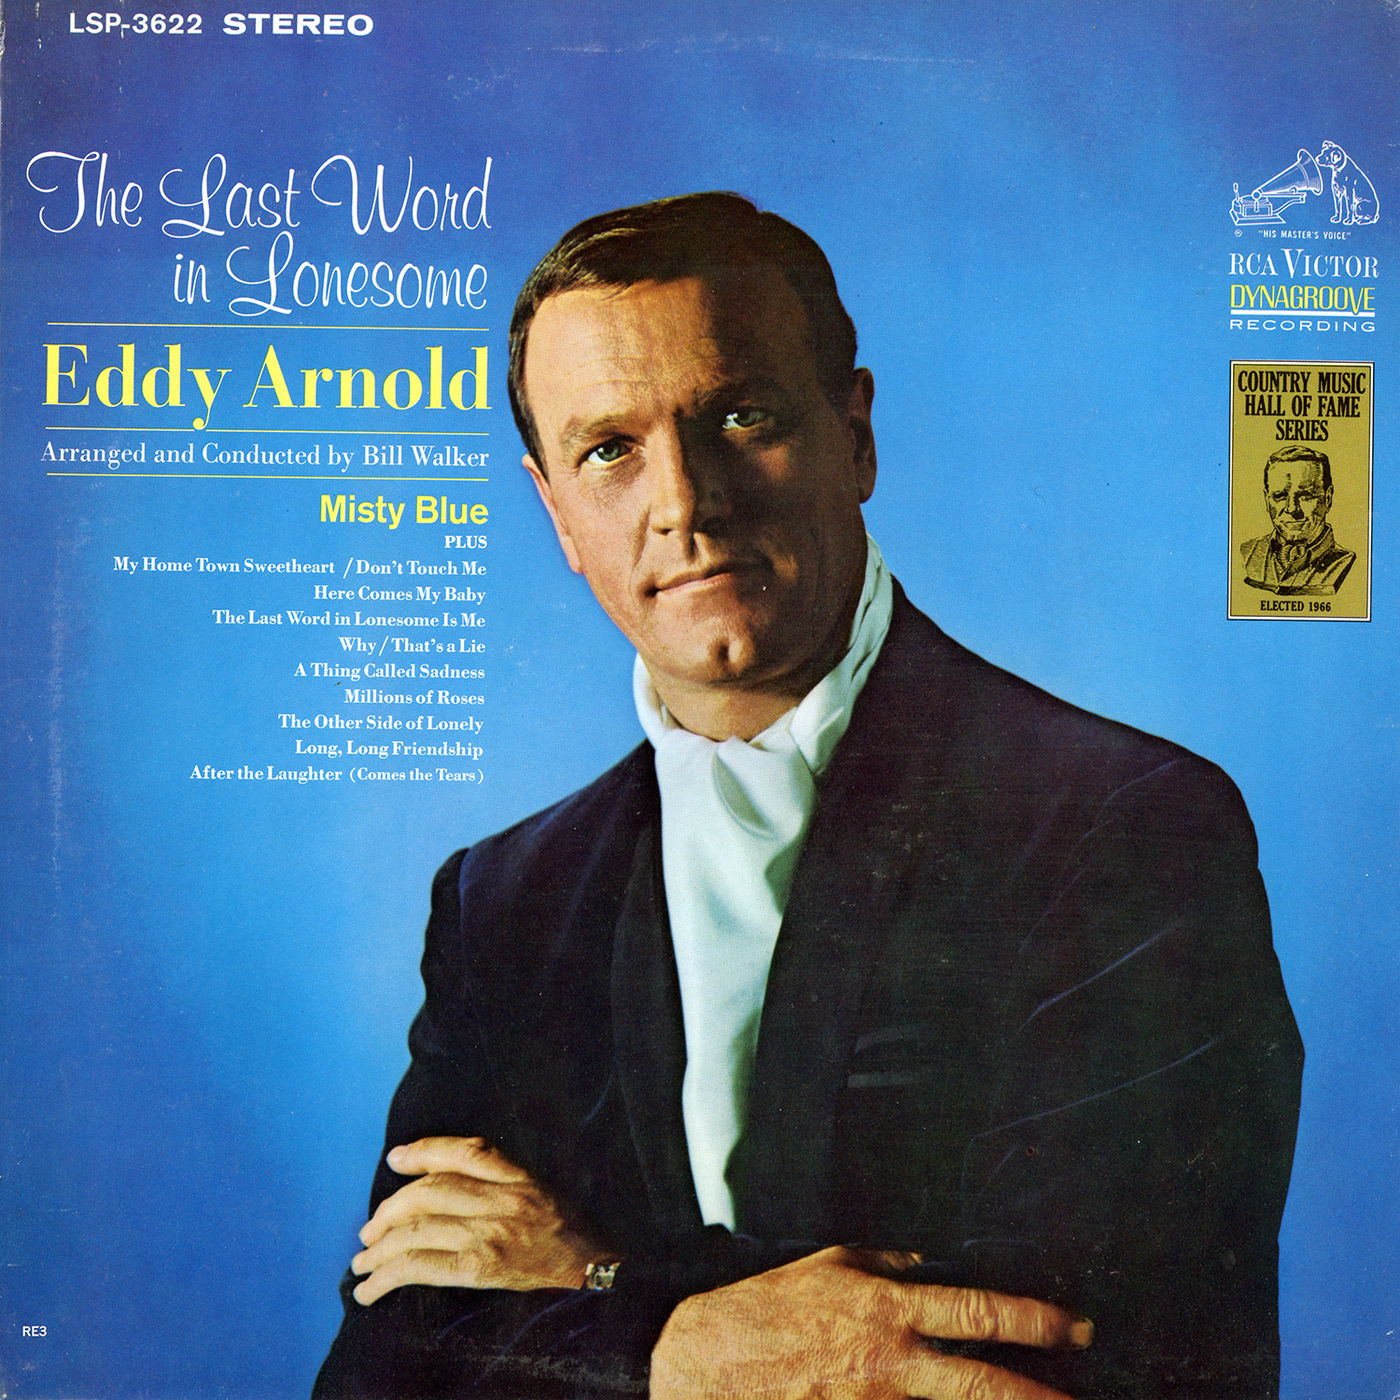 Eddy Arnold – The Last Word in Lonesome